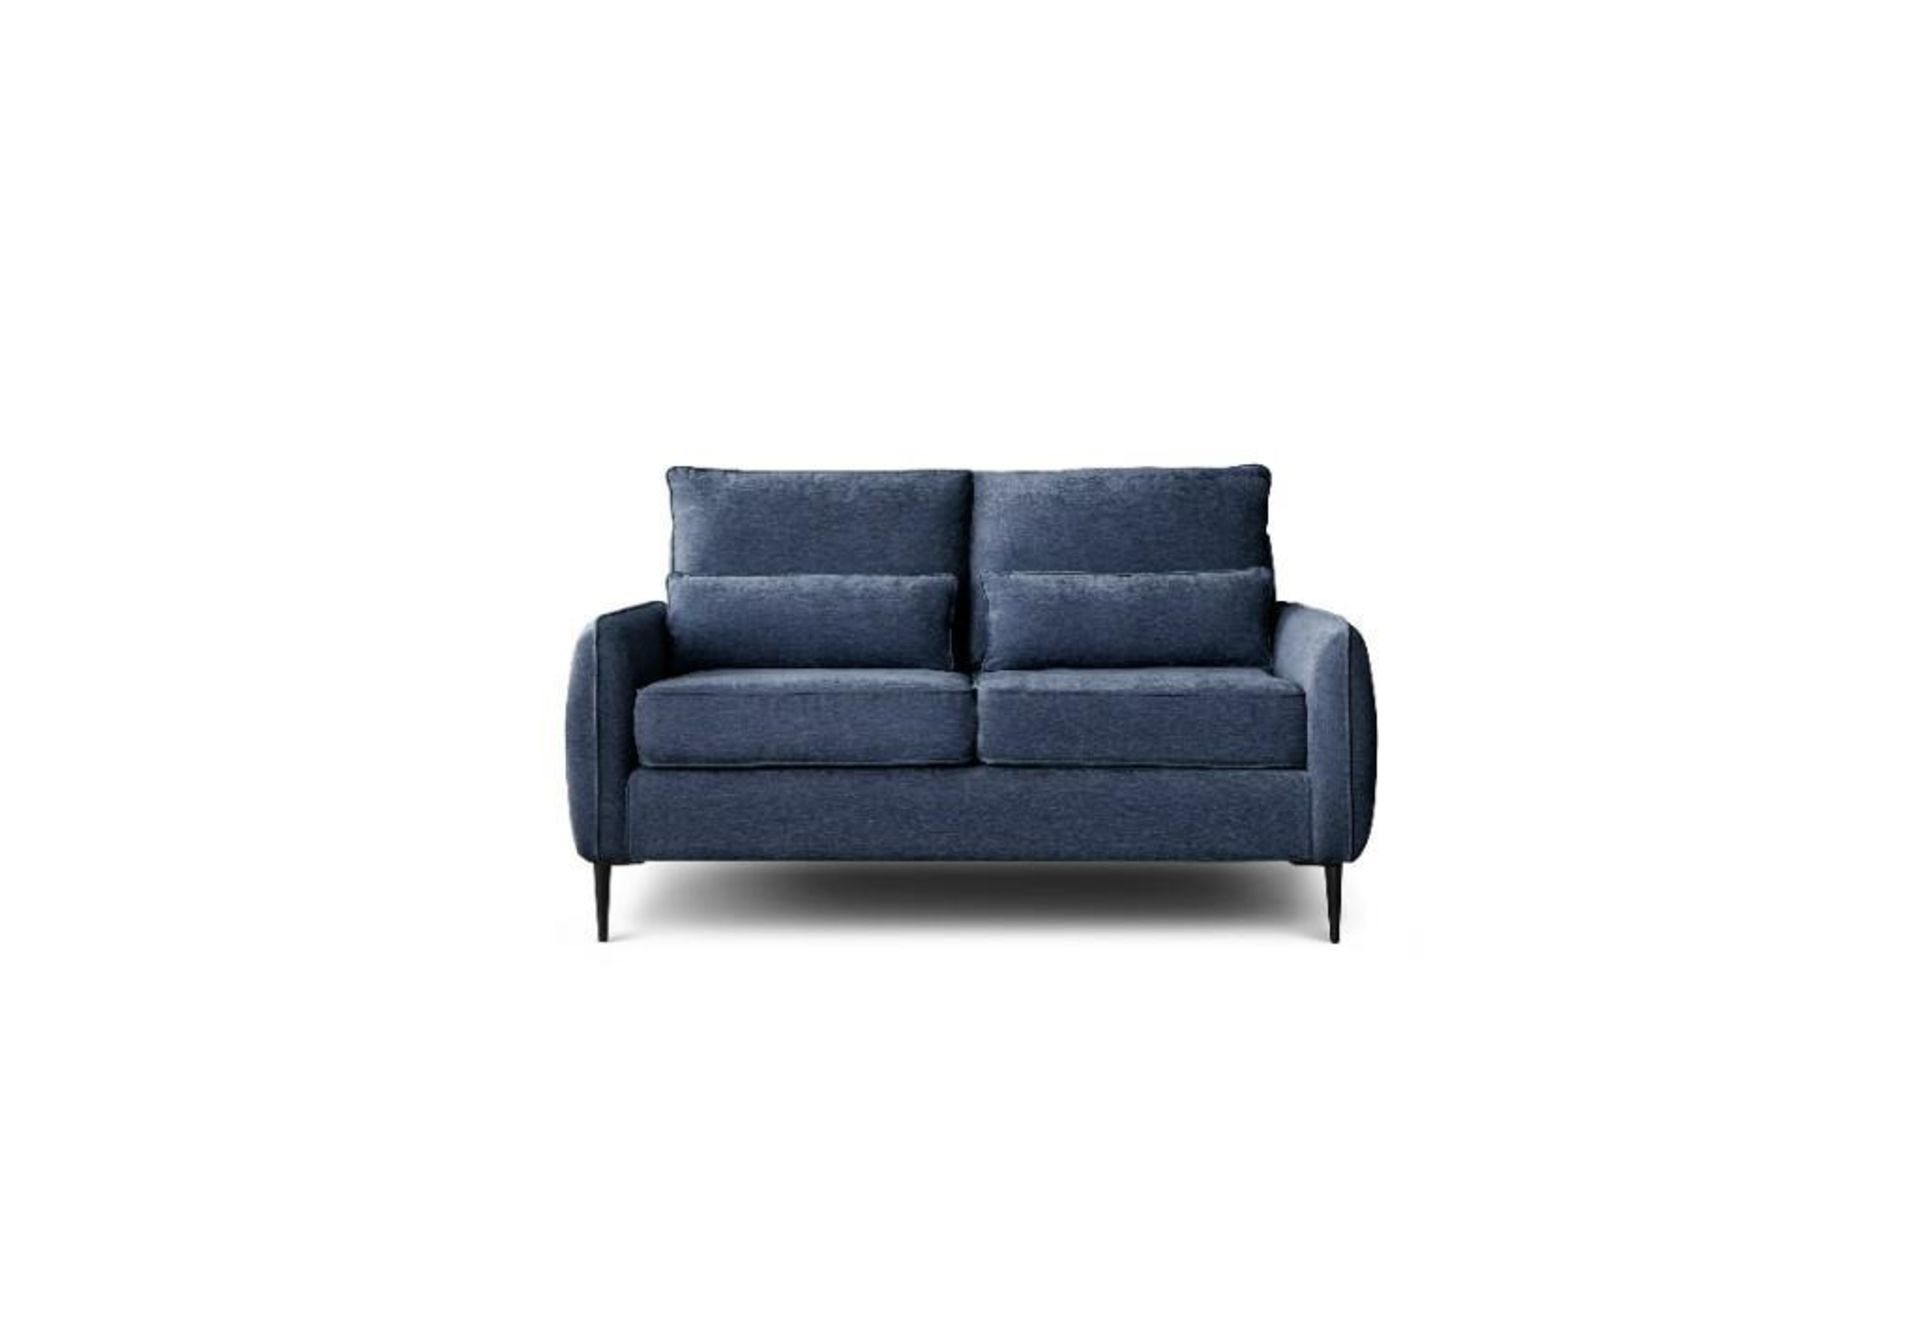 Brand new Boxed 2 Seater Rhonda Sofa in Navy - Image 3 of 3